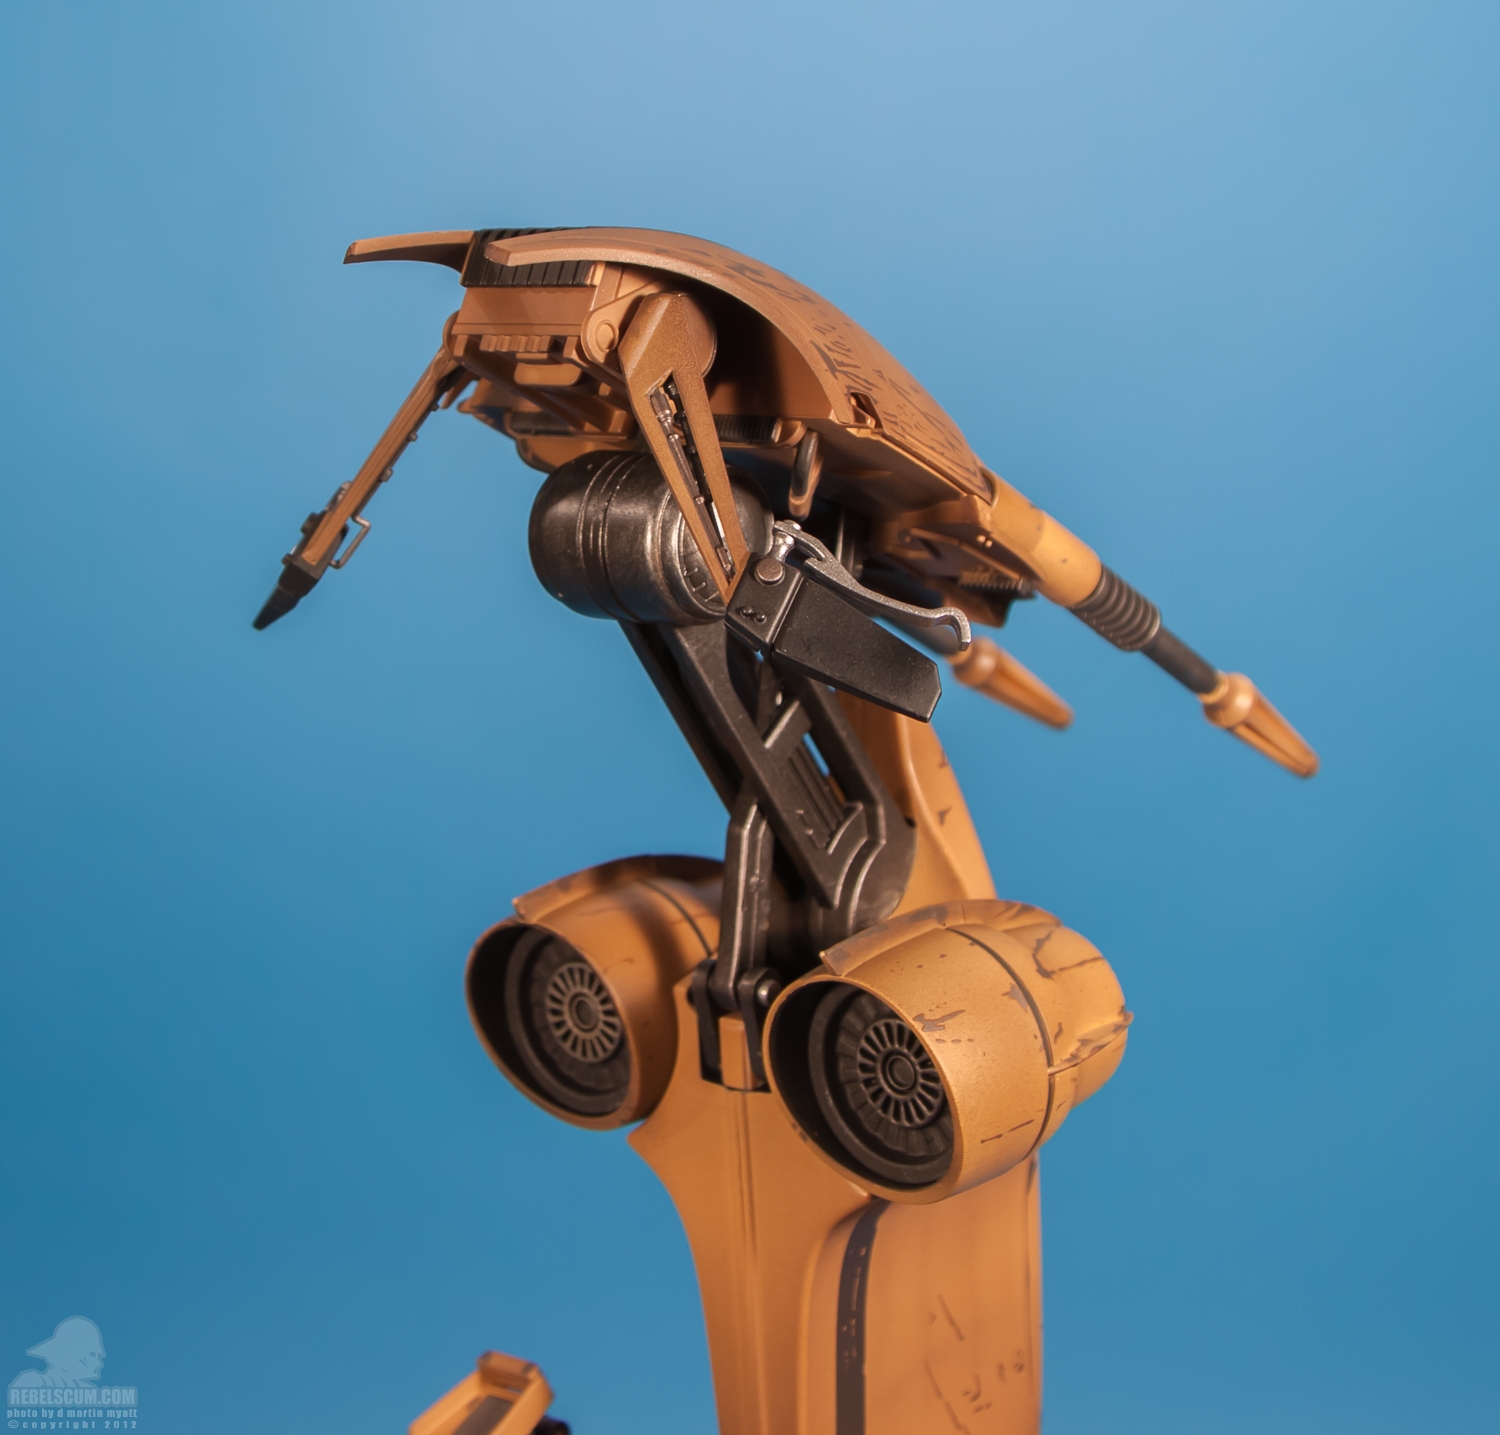 STAP_Battle_Droid_Star_Wars_Sideshow_Collectibles-33.jpg